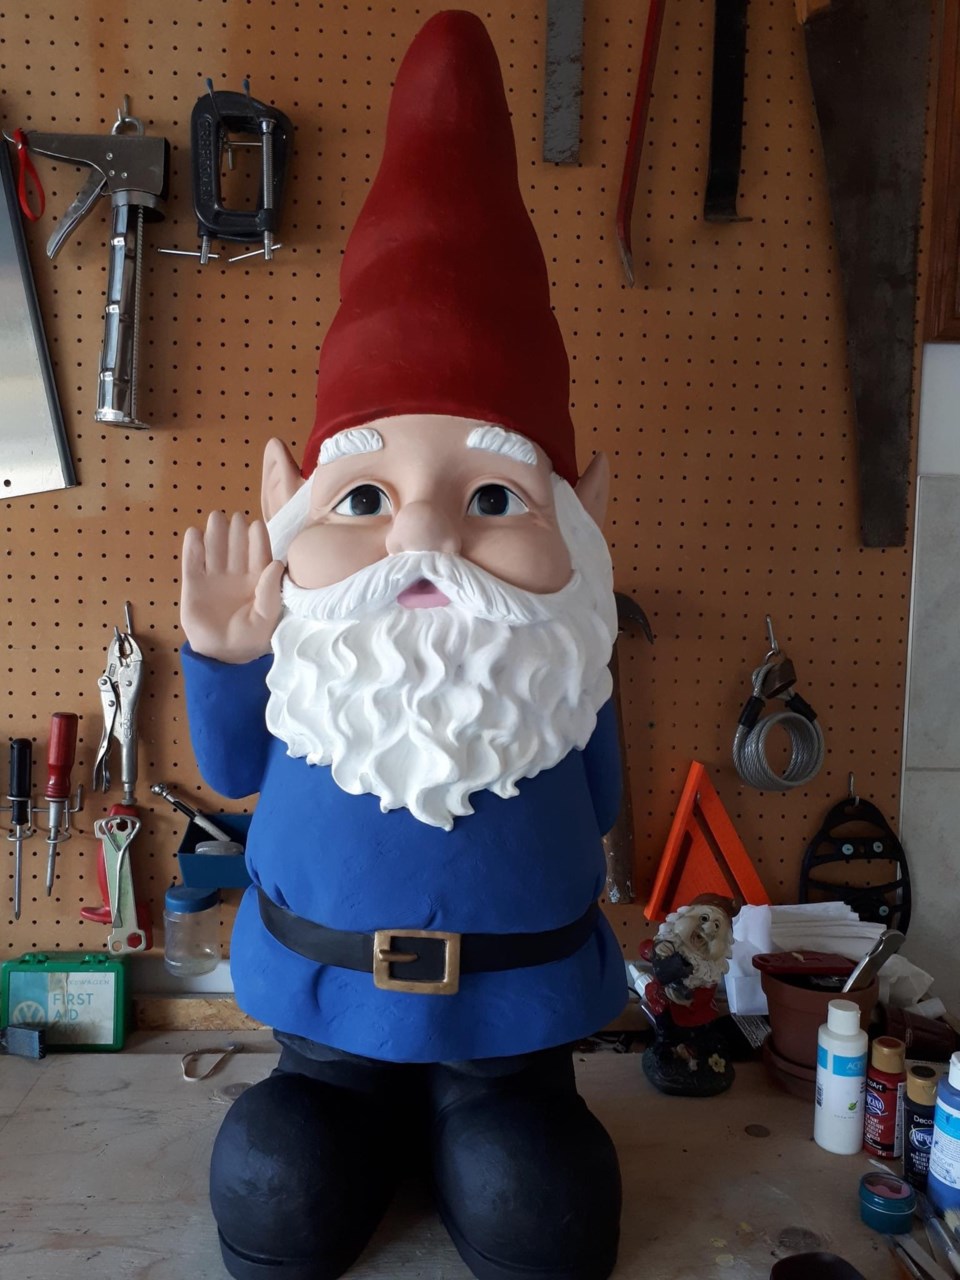 20210807 Missing Gnome submitted pic